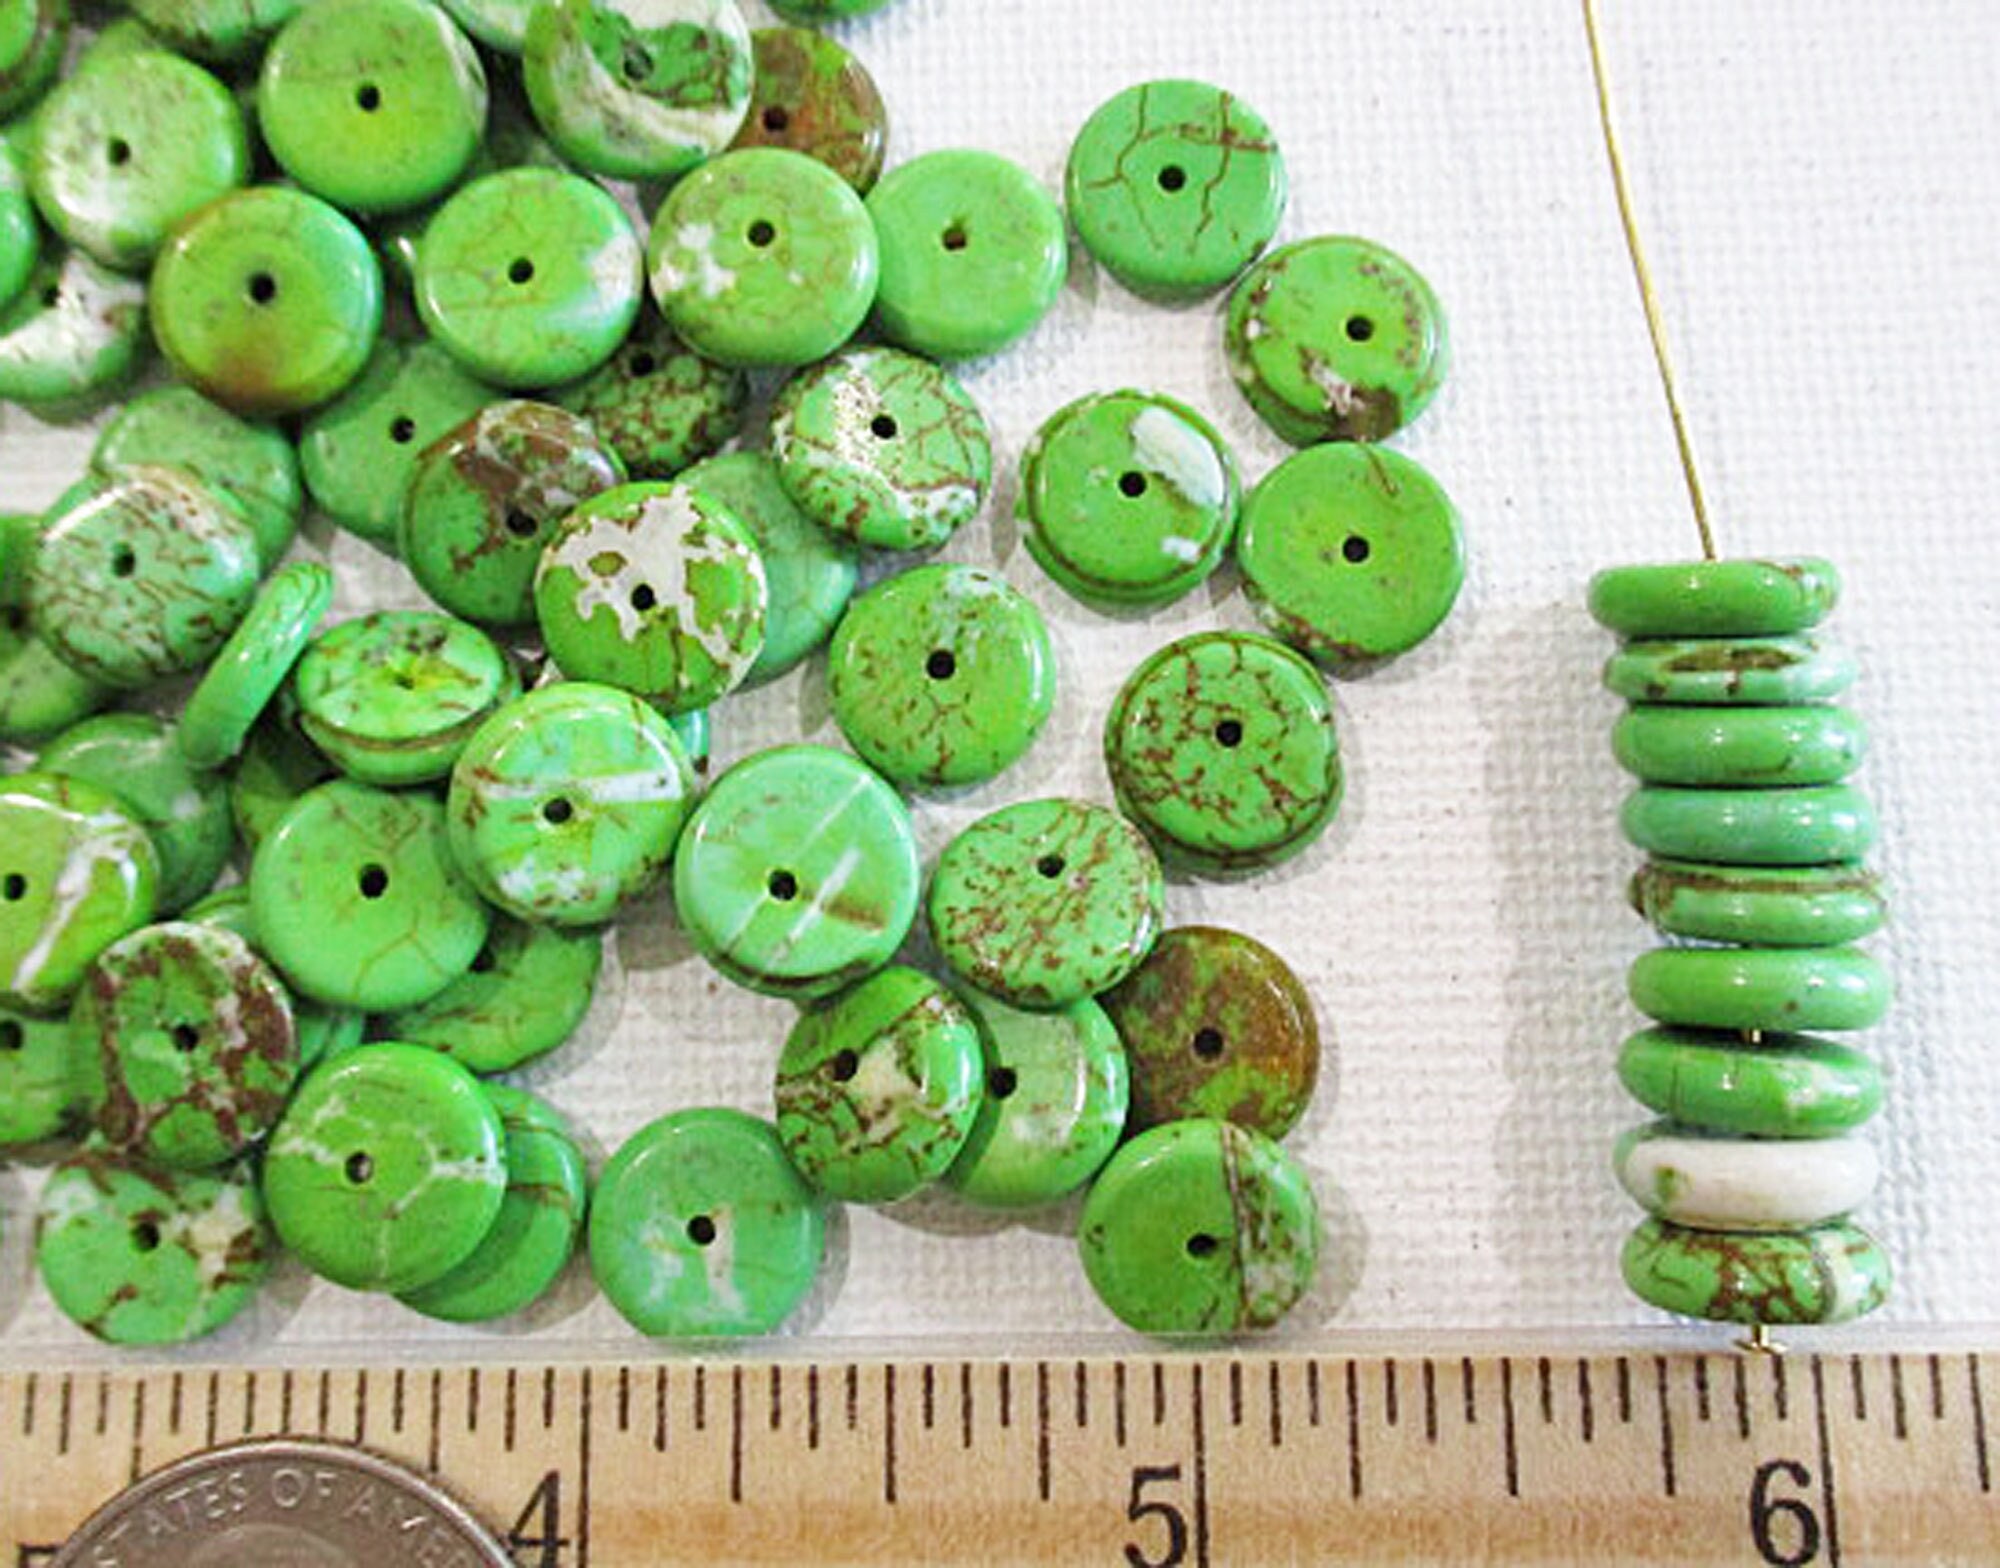 Lime Green Turquoise Magnesite Faceted Tube Beads 18mm x 10mm 5408